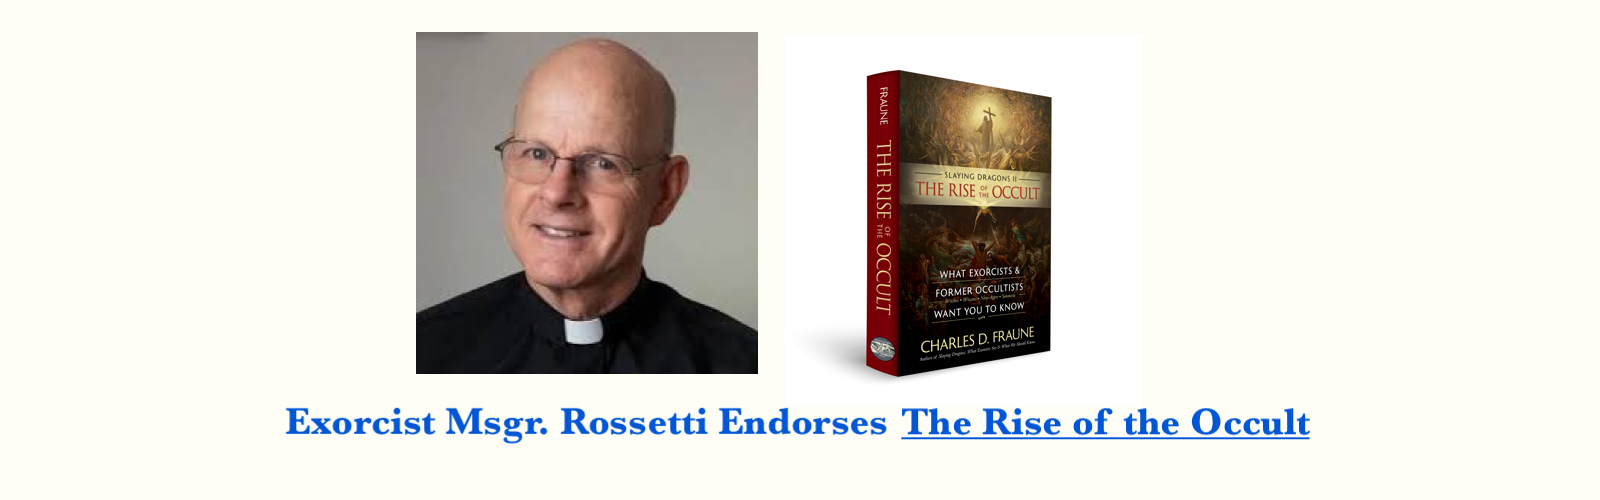 Prominent Exorcist, Msgr. Stephen Rossetti, Endorses "The Rise of the Occult"!